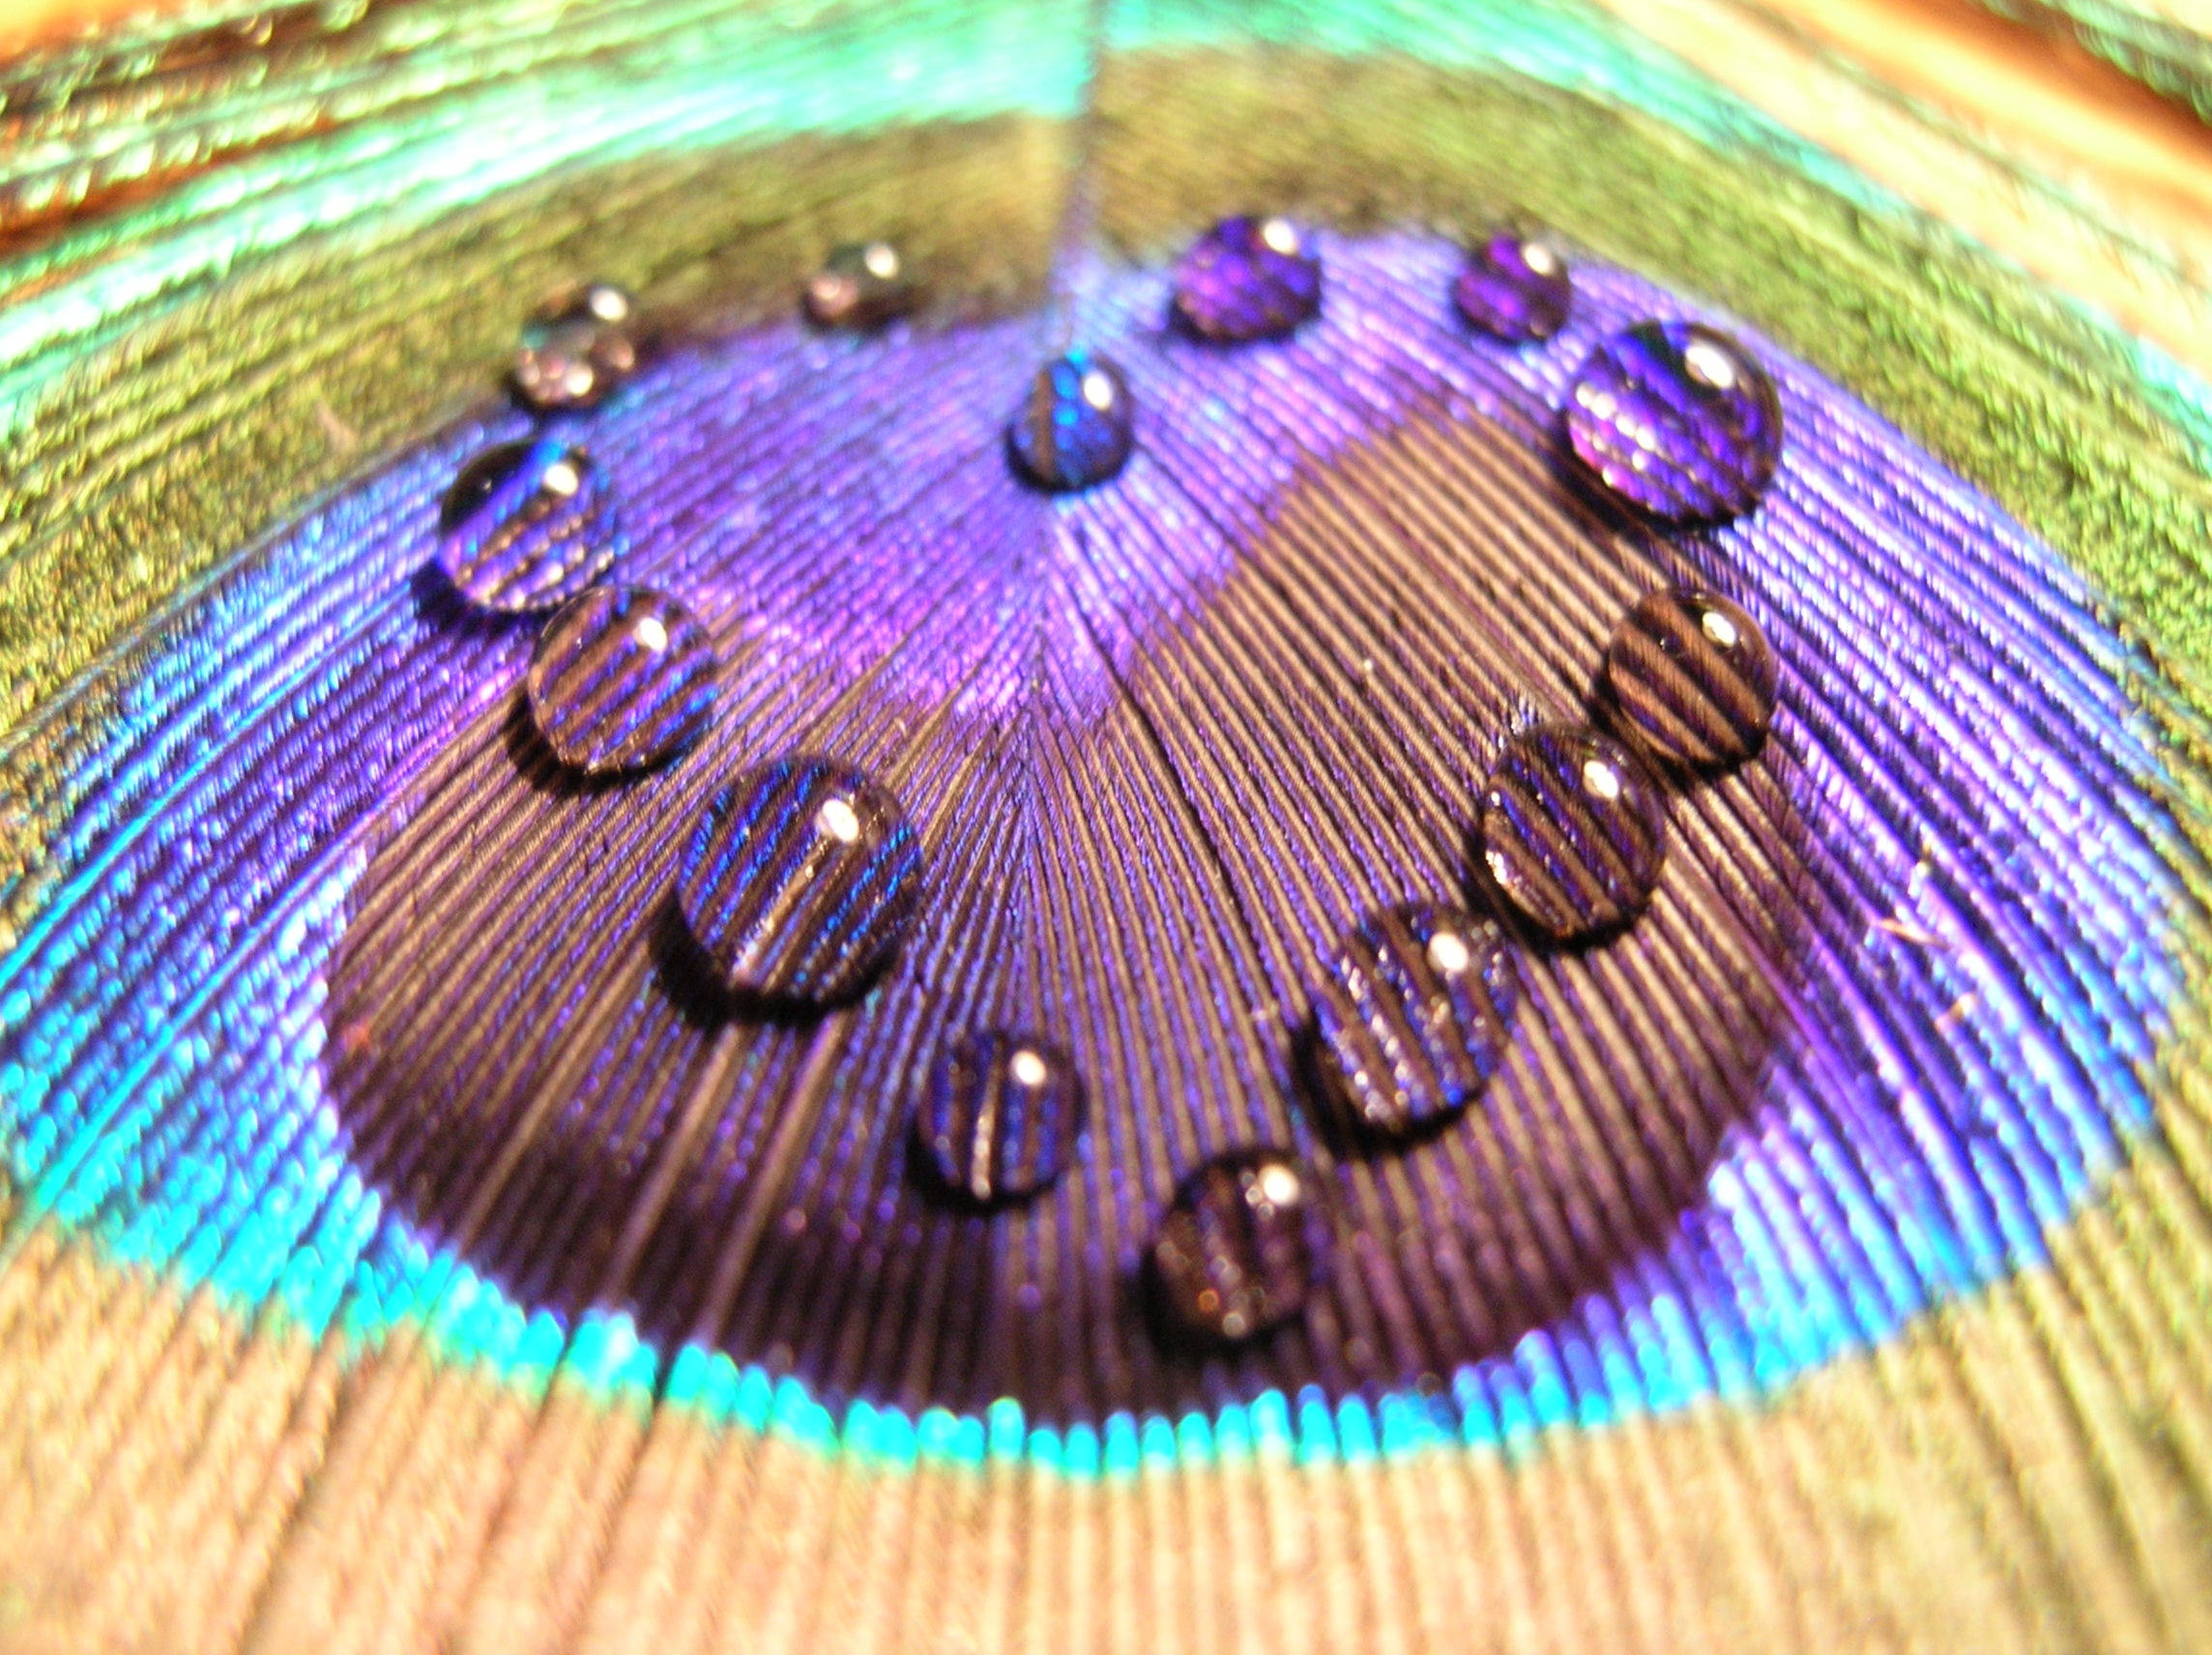 Microscopic Heart Droplets On Peacock Feather Background